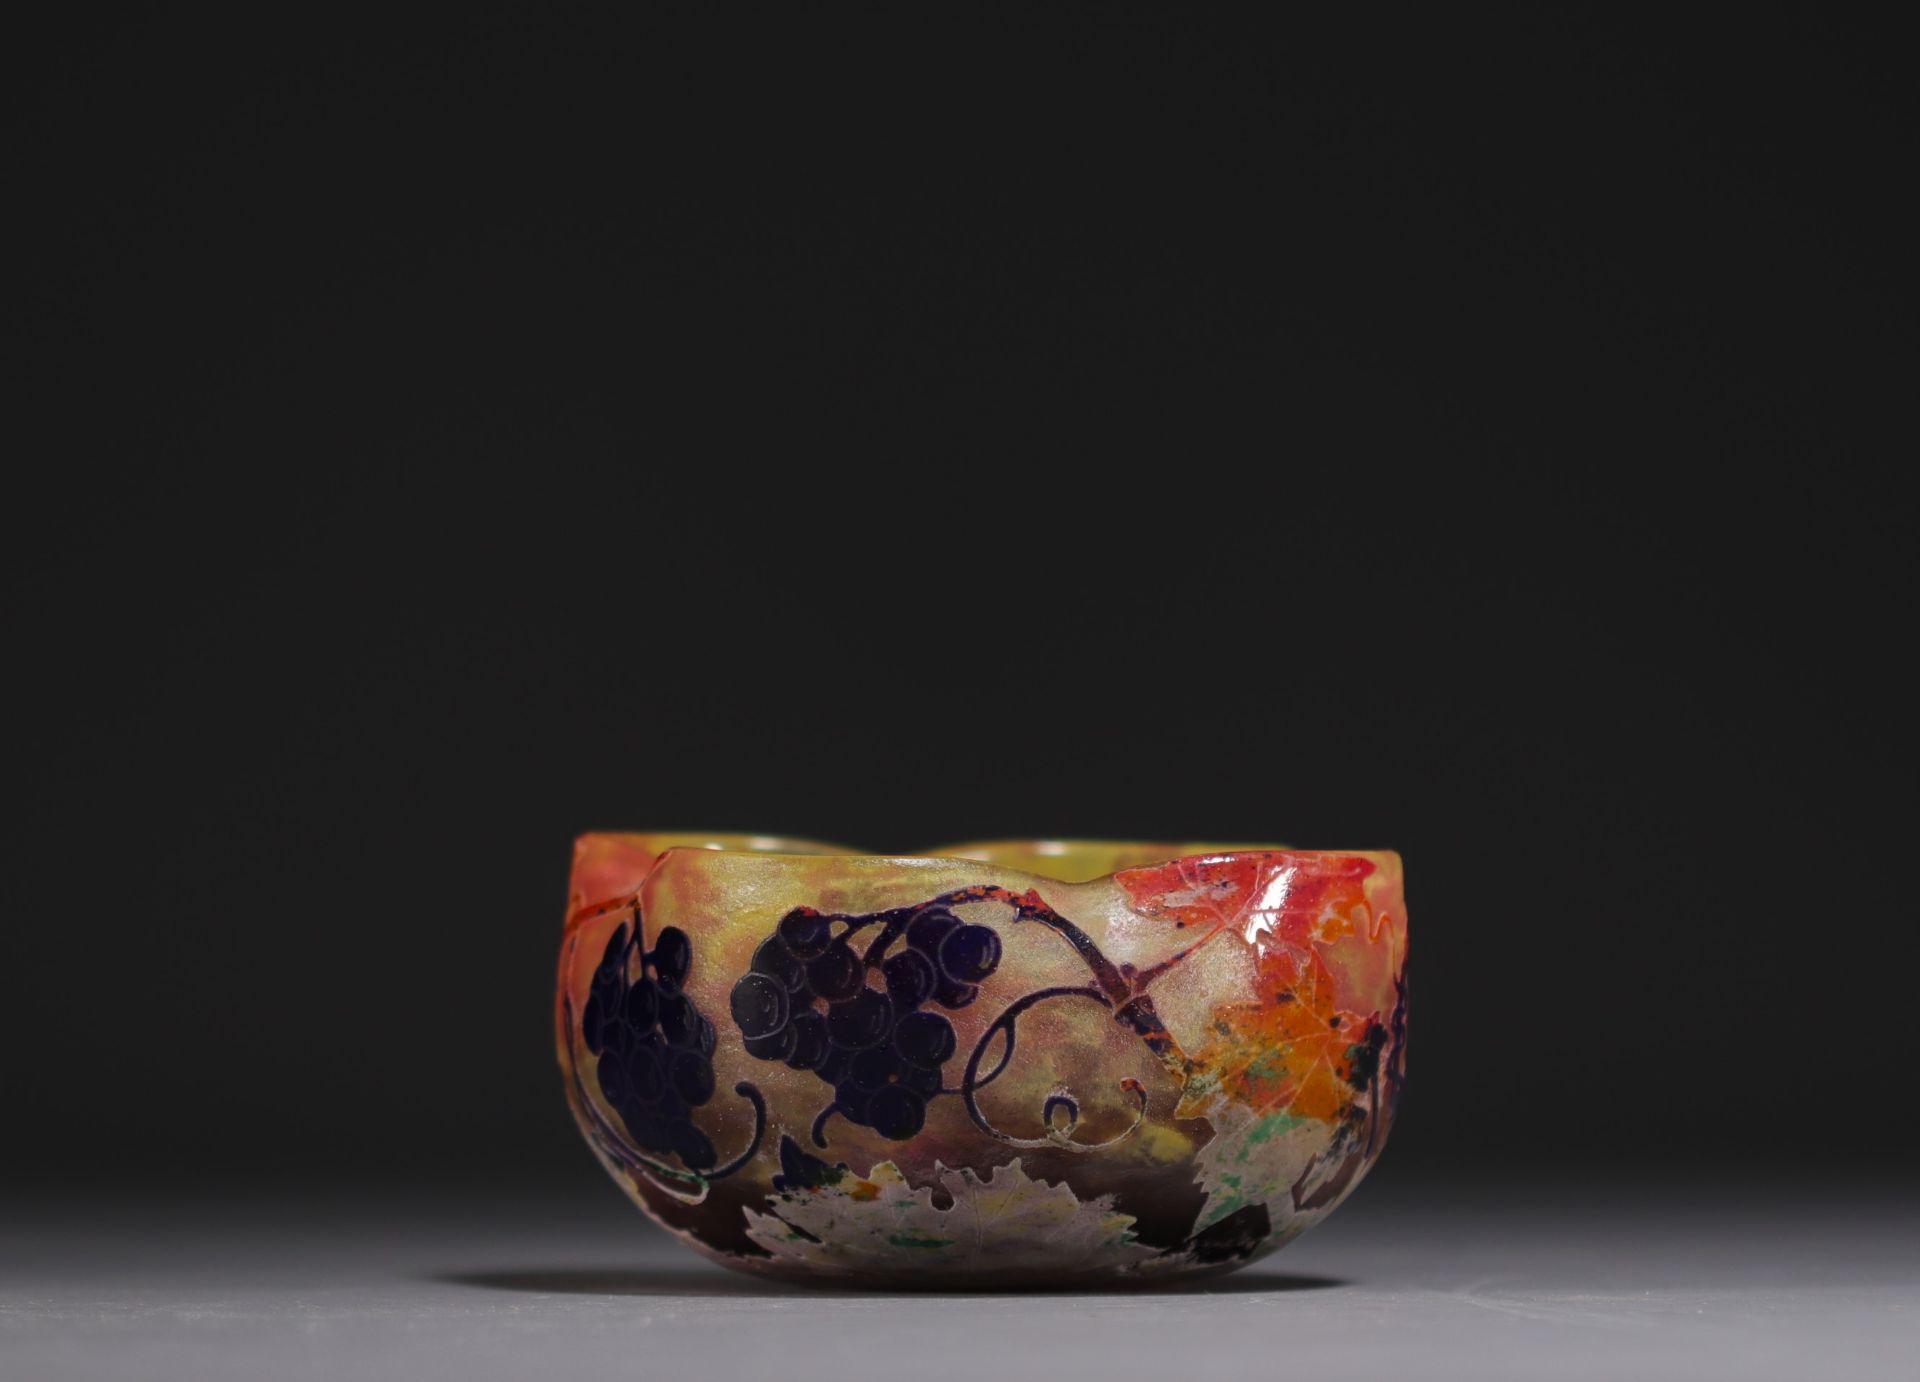 DAUM Nancy - Four-lobed bowl in acid-etched multi-layered glass decorated with bunches of grapes, si - Image 4 of 4